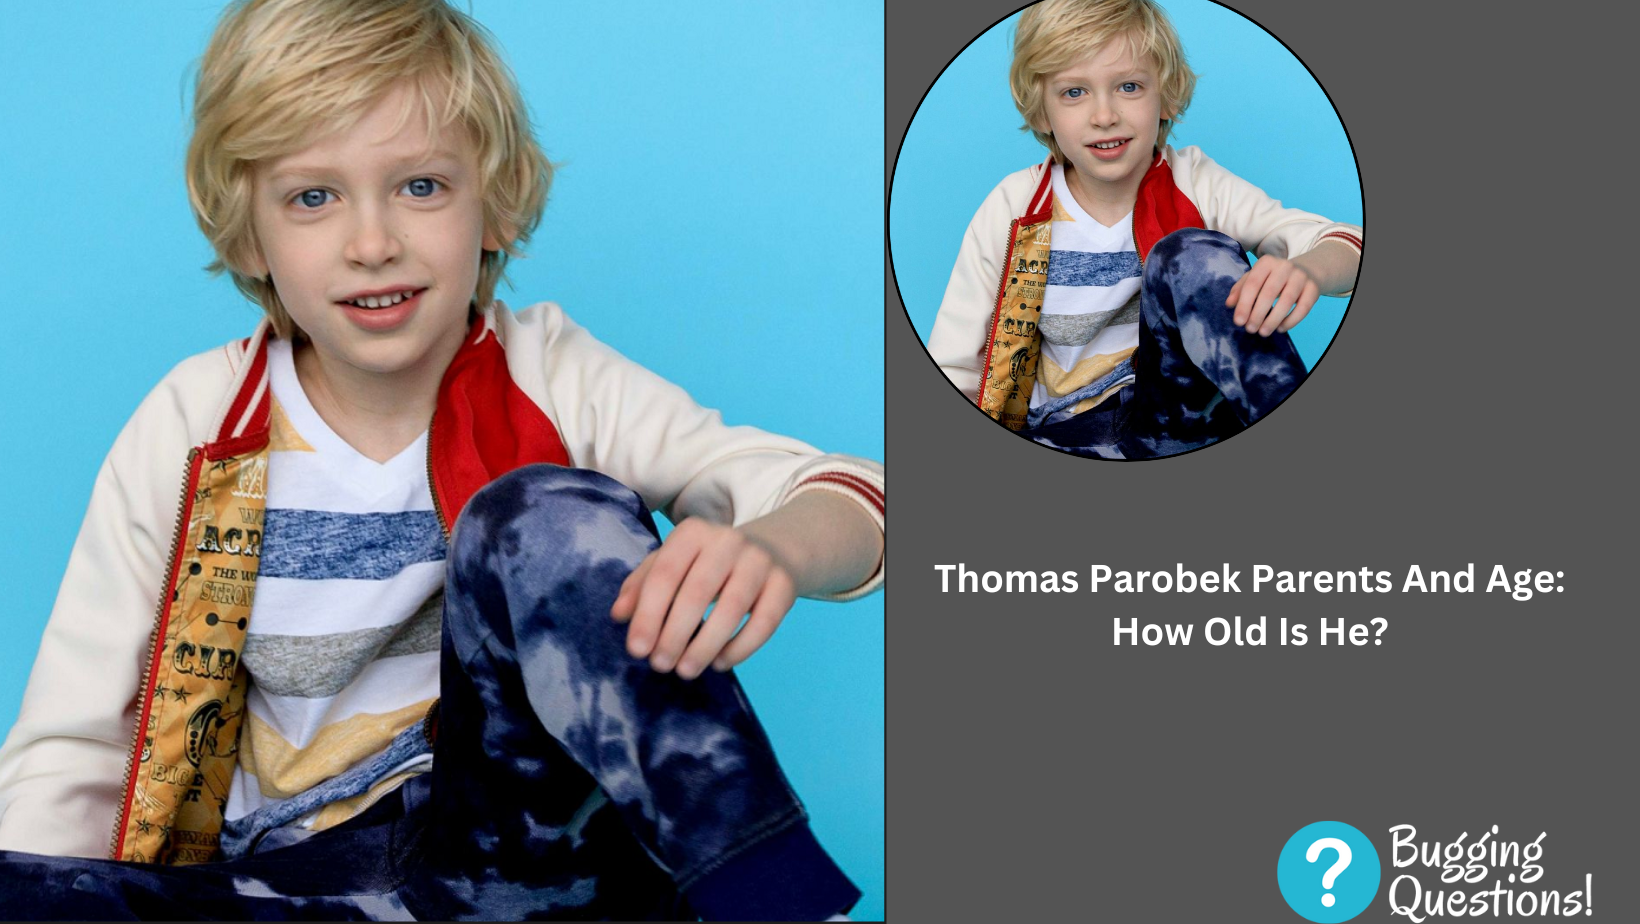 Thomas Parobek Parents And Age: How Old Is He?